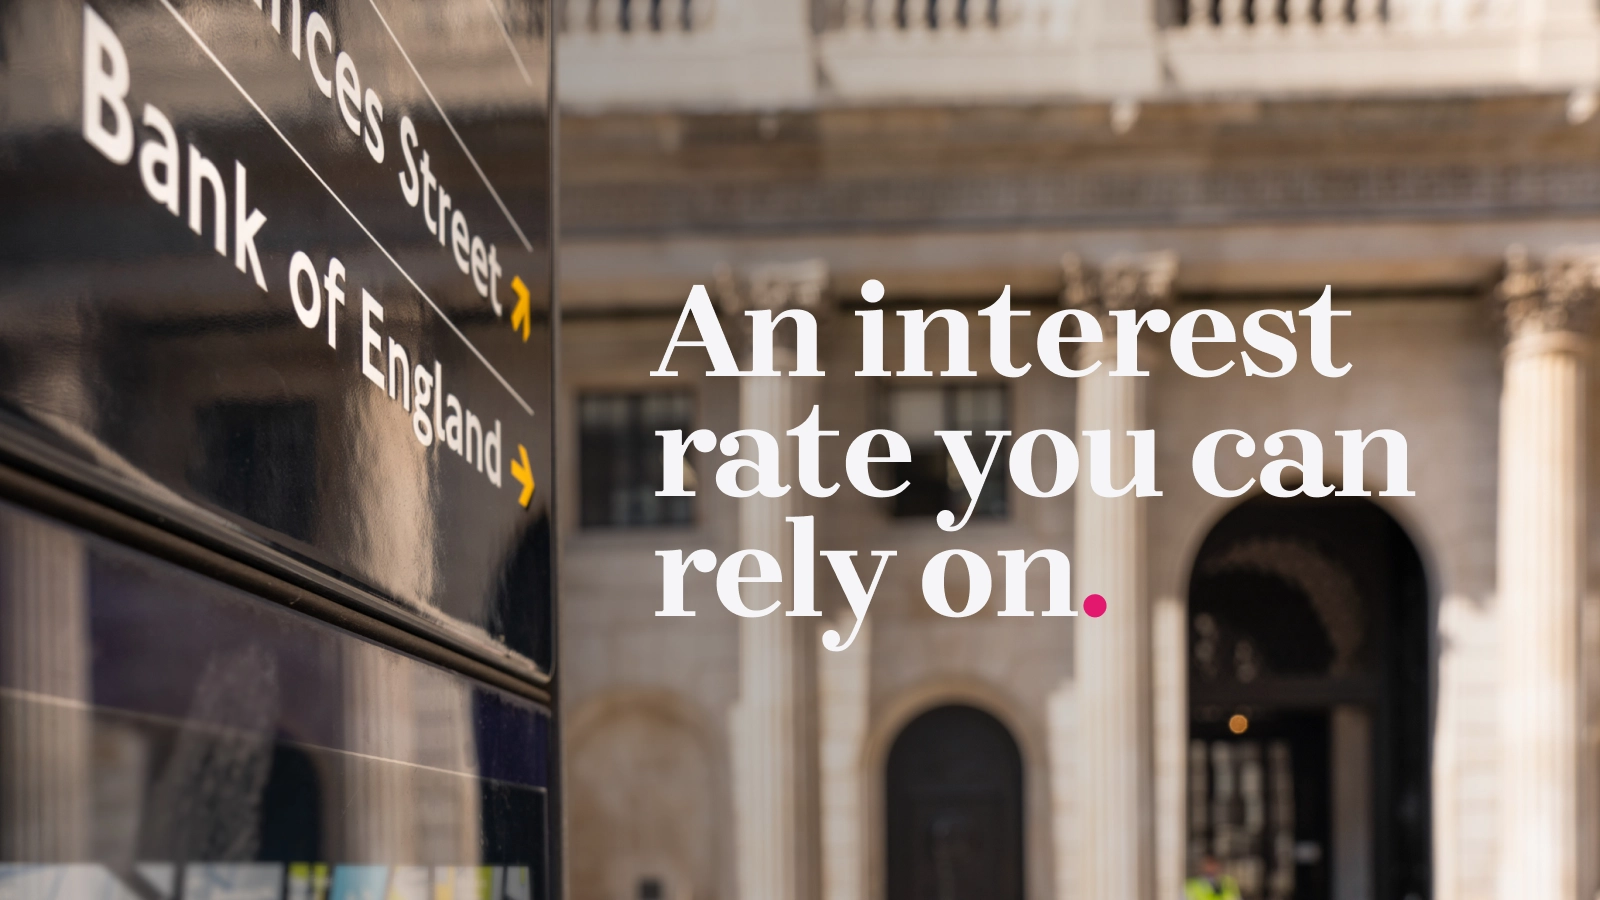 An interest rate you can rely on